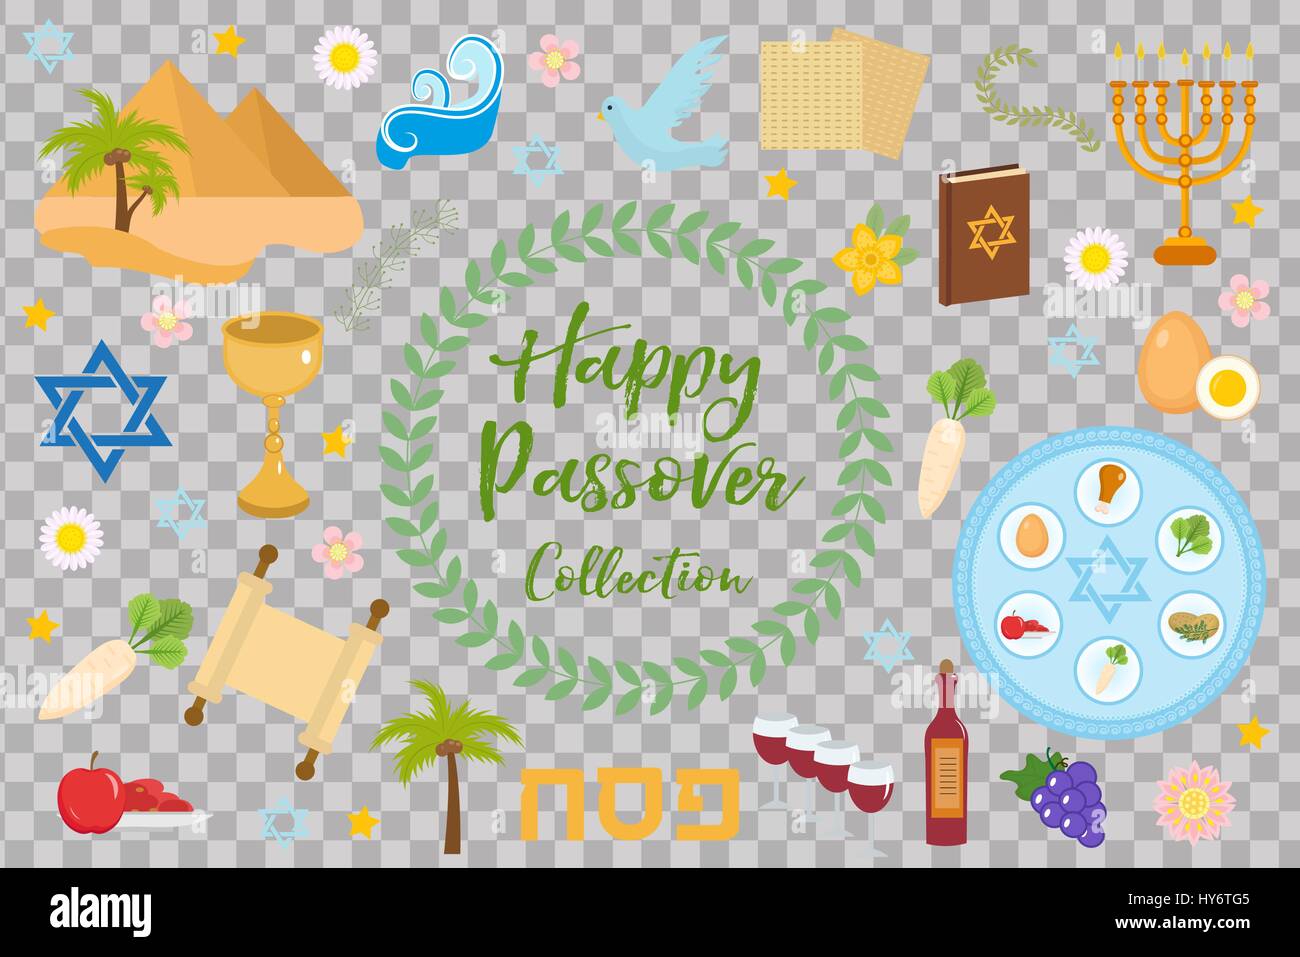 Passover icons set. flat, cartoon style. Jewish holiday of exodus Egypt. Collection with Seder plate, meal, matzah, wine, torus, pyramid. Isolated on white background Vector illustration. Stock Vector